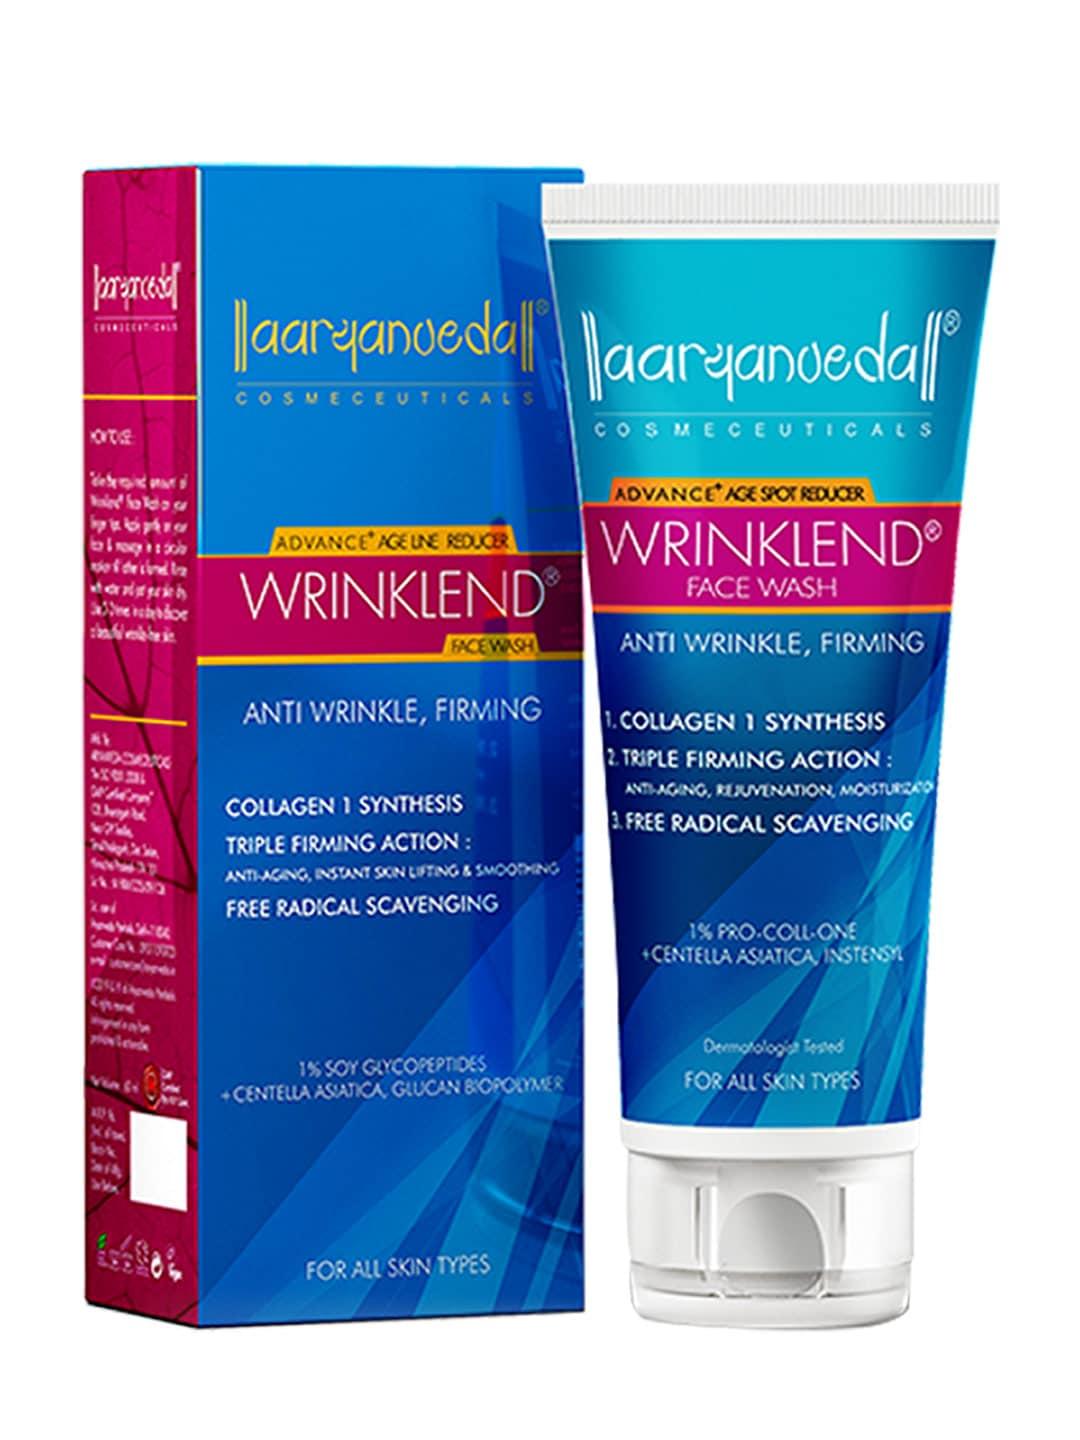 Aryanveda Wrinklend Advance Age Spot Reducer Anti Wrinkle Face Wash For Skin Firming- 60ml